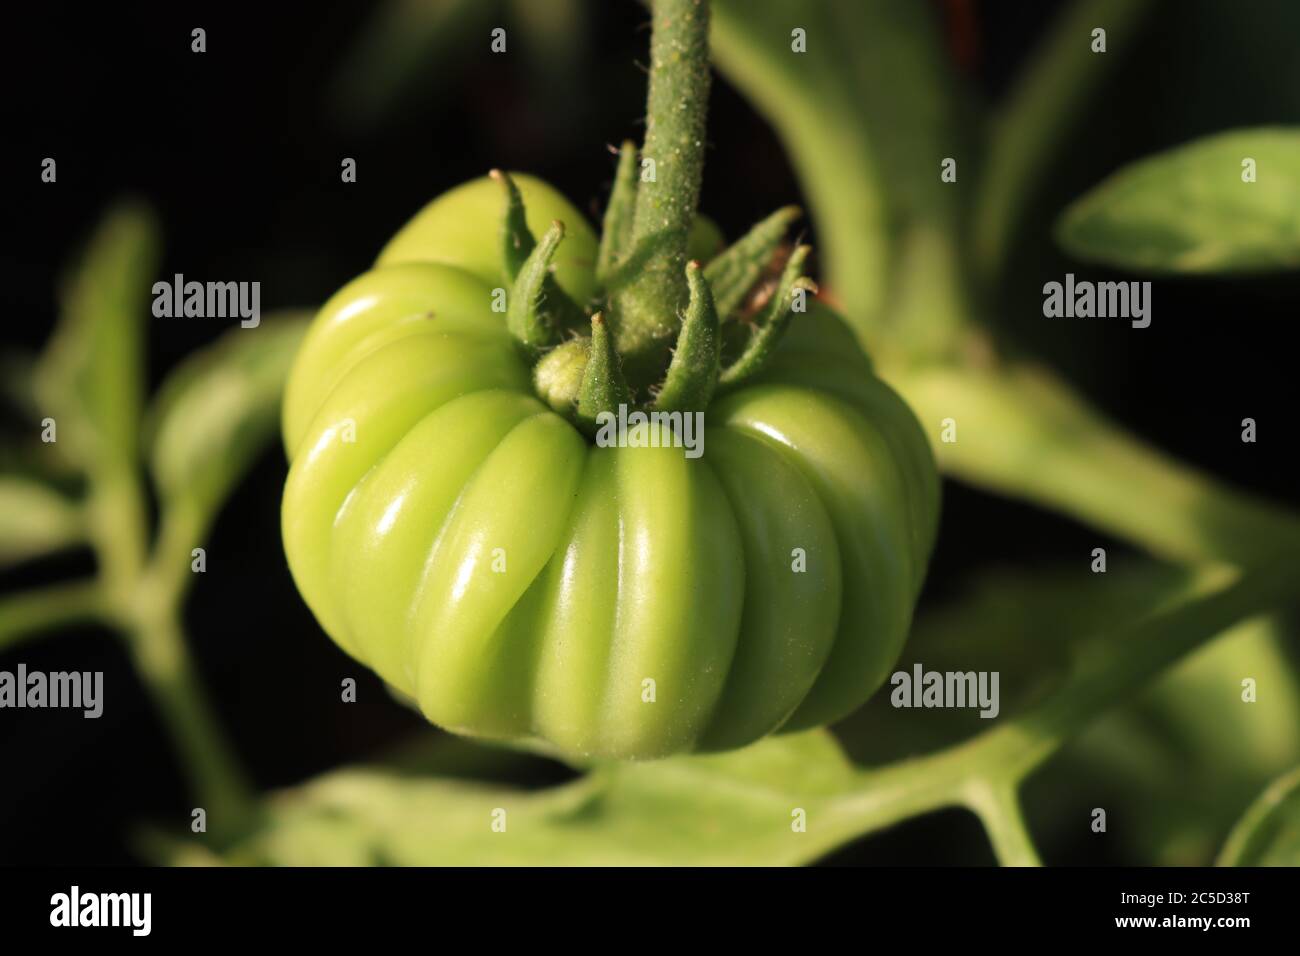 Green beefsteak tomatoes on their plants close up Marmande tomatoes. Perfect formation Stock Photo